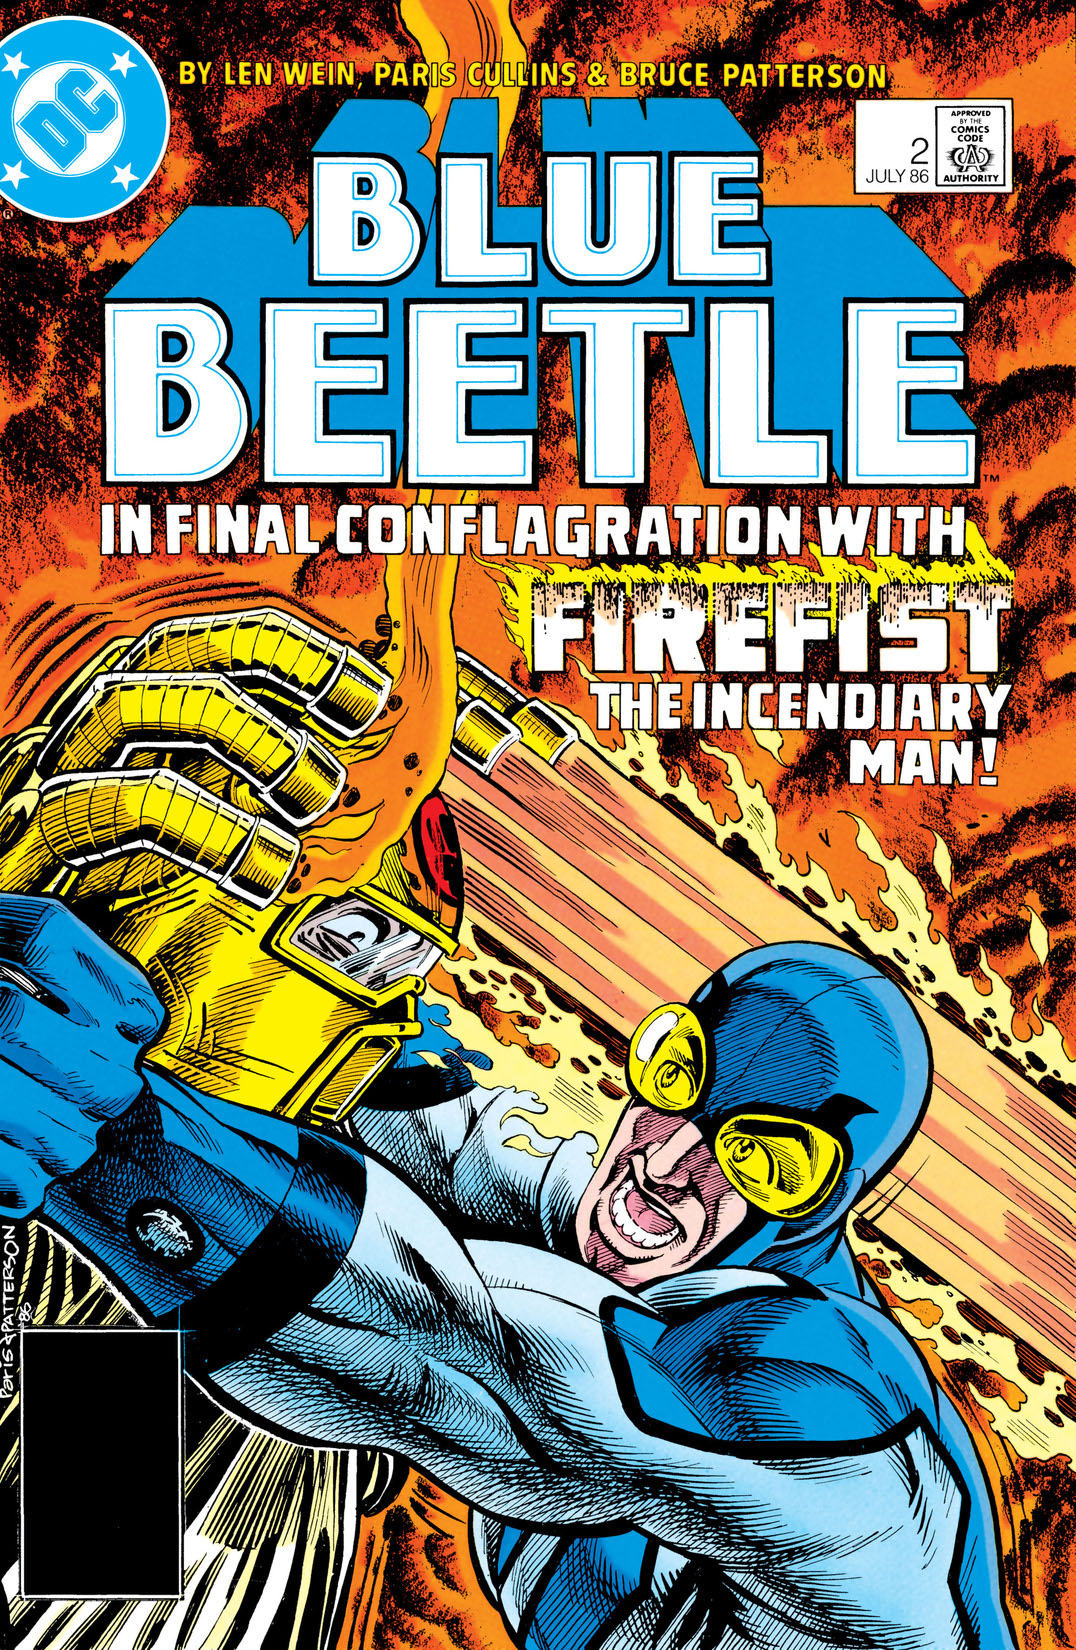 Blue Beetle (1986-) #2 preview images